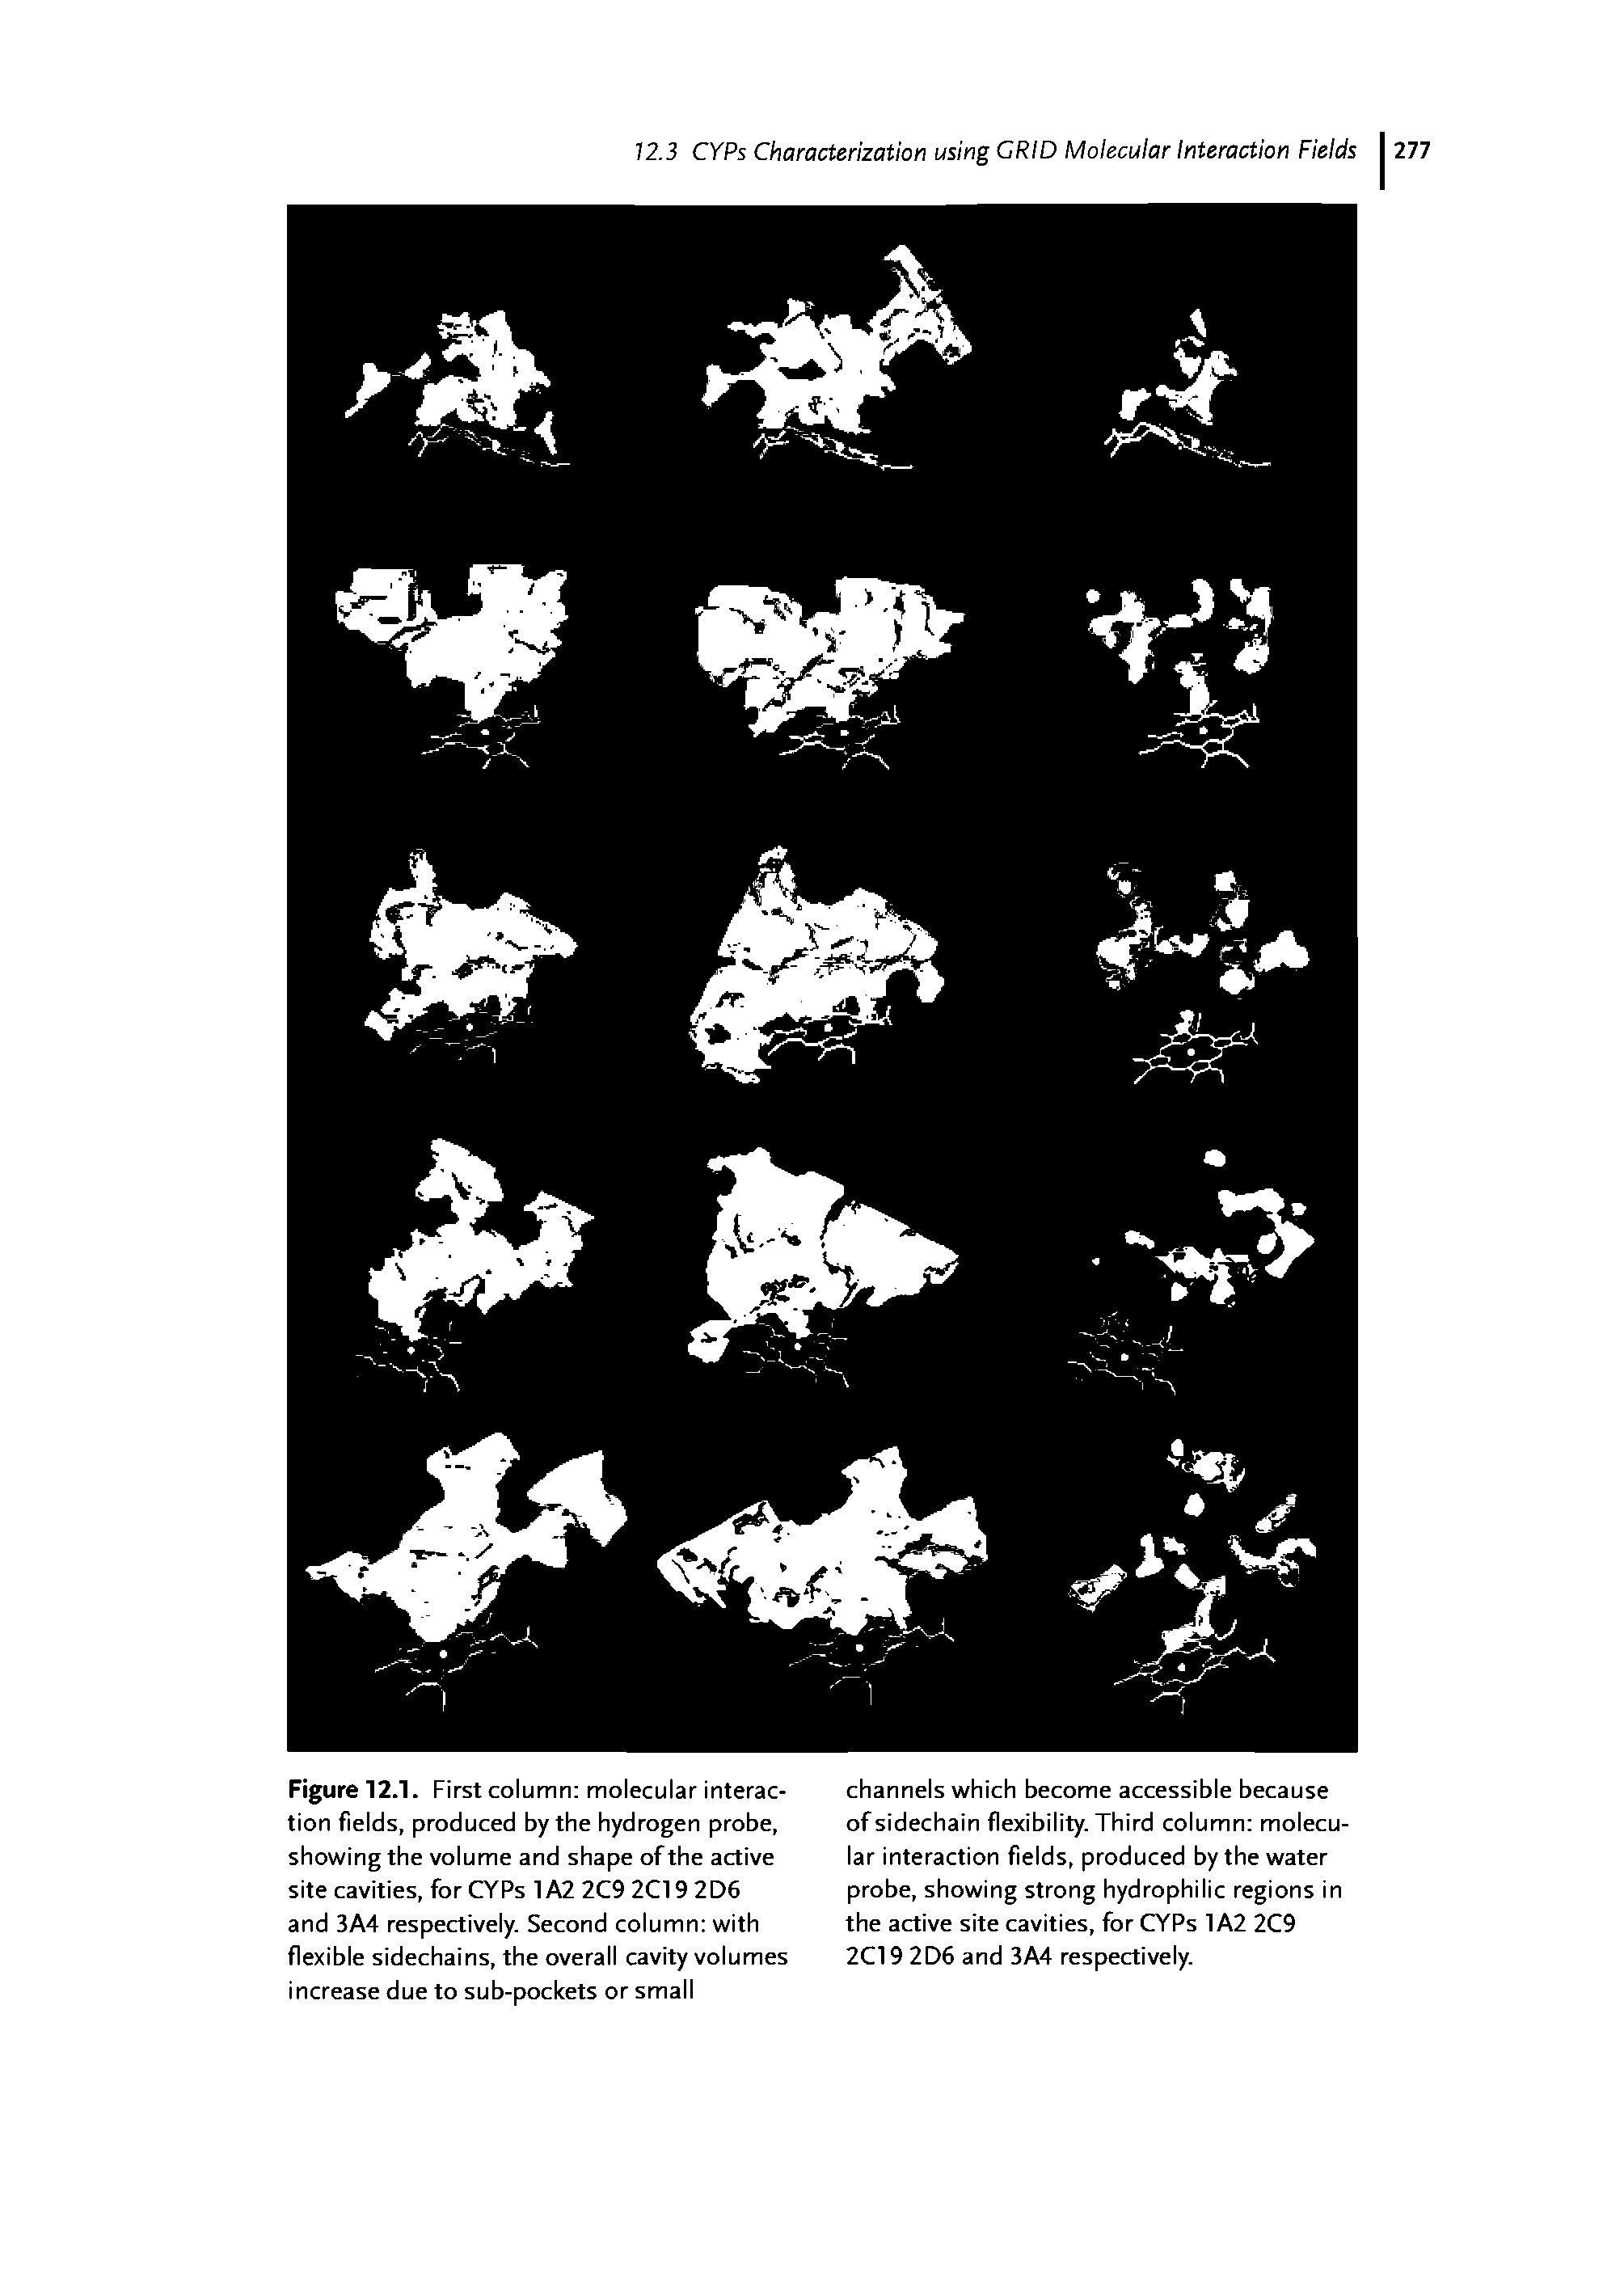 Figure 12.1. First column molecular interaction fields, produced by the hydrogen probe, showing the volume and shape of the active site cavities, for CYPs 1A2 2C9 2C19 2D6 and 3A4 respectively. Second column with flexible sidechains, the overall cavity volumes increase due to sub-pockets or small...